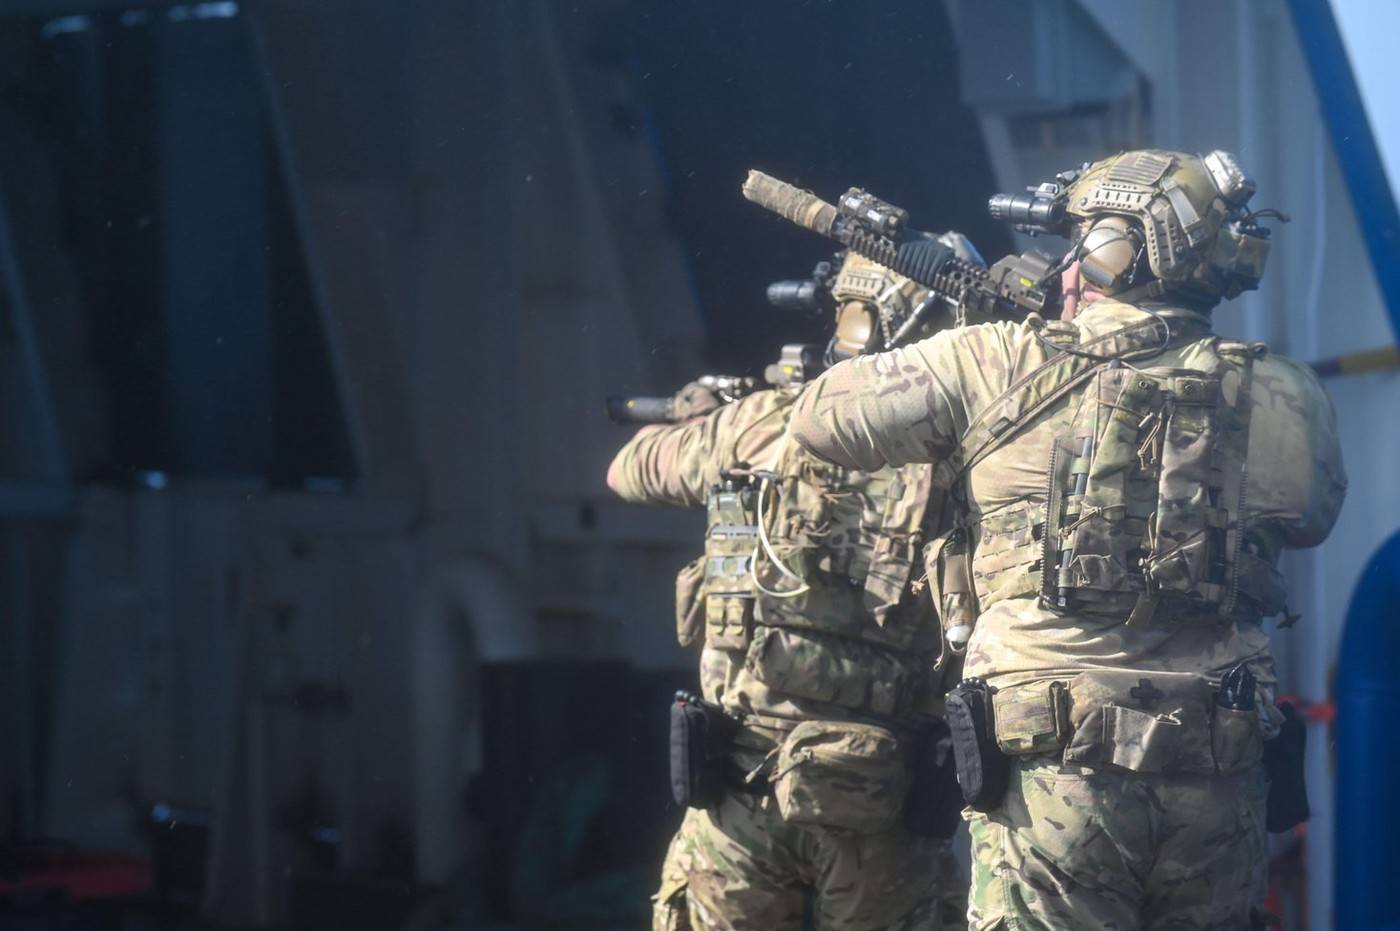 West Coast-based Naval Special Warfare (NSW) operators conduct visit, board, search, and seizure training aboard a contracted vessel during maritime interdiction operations training. Naval Special Warfare is the nation's elite maritime special operations 